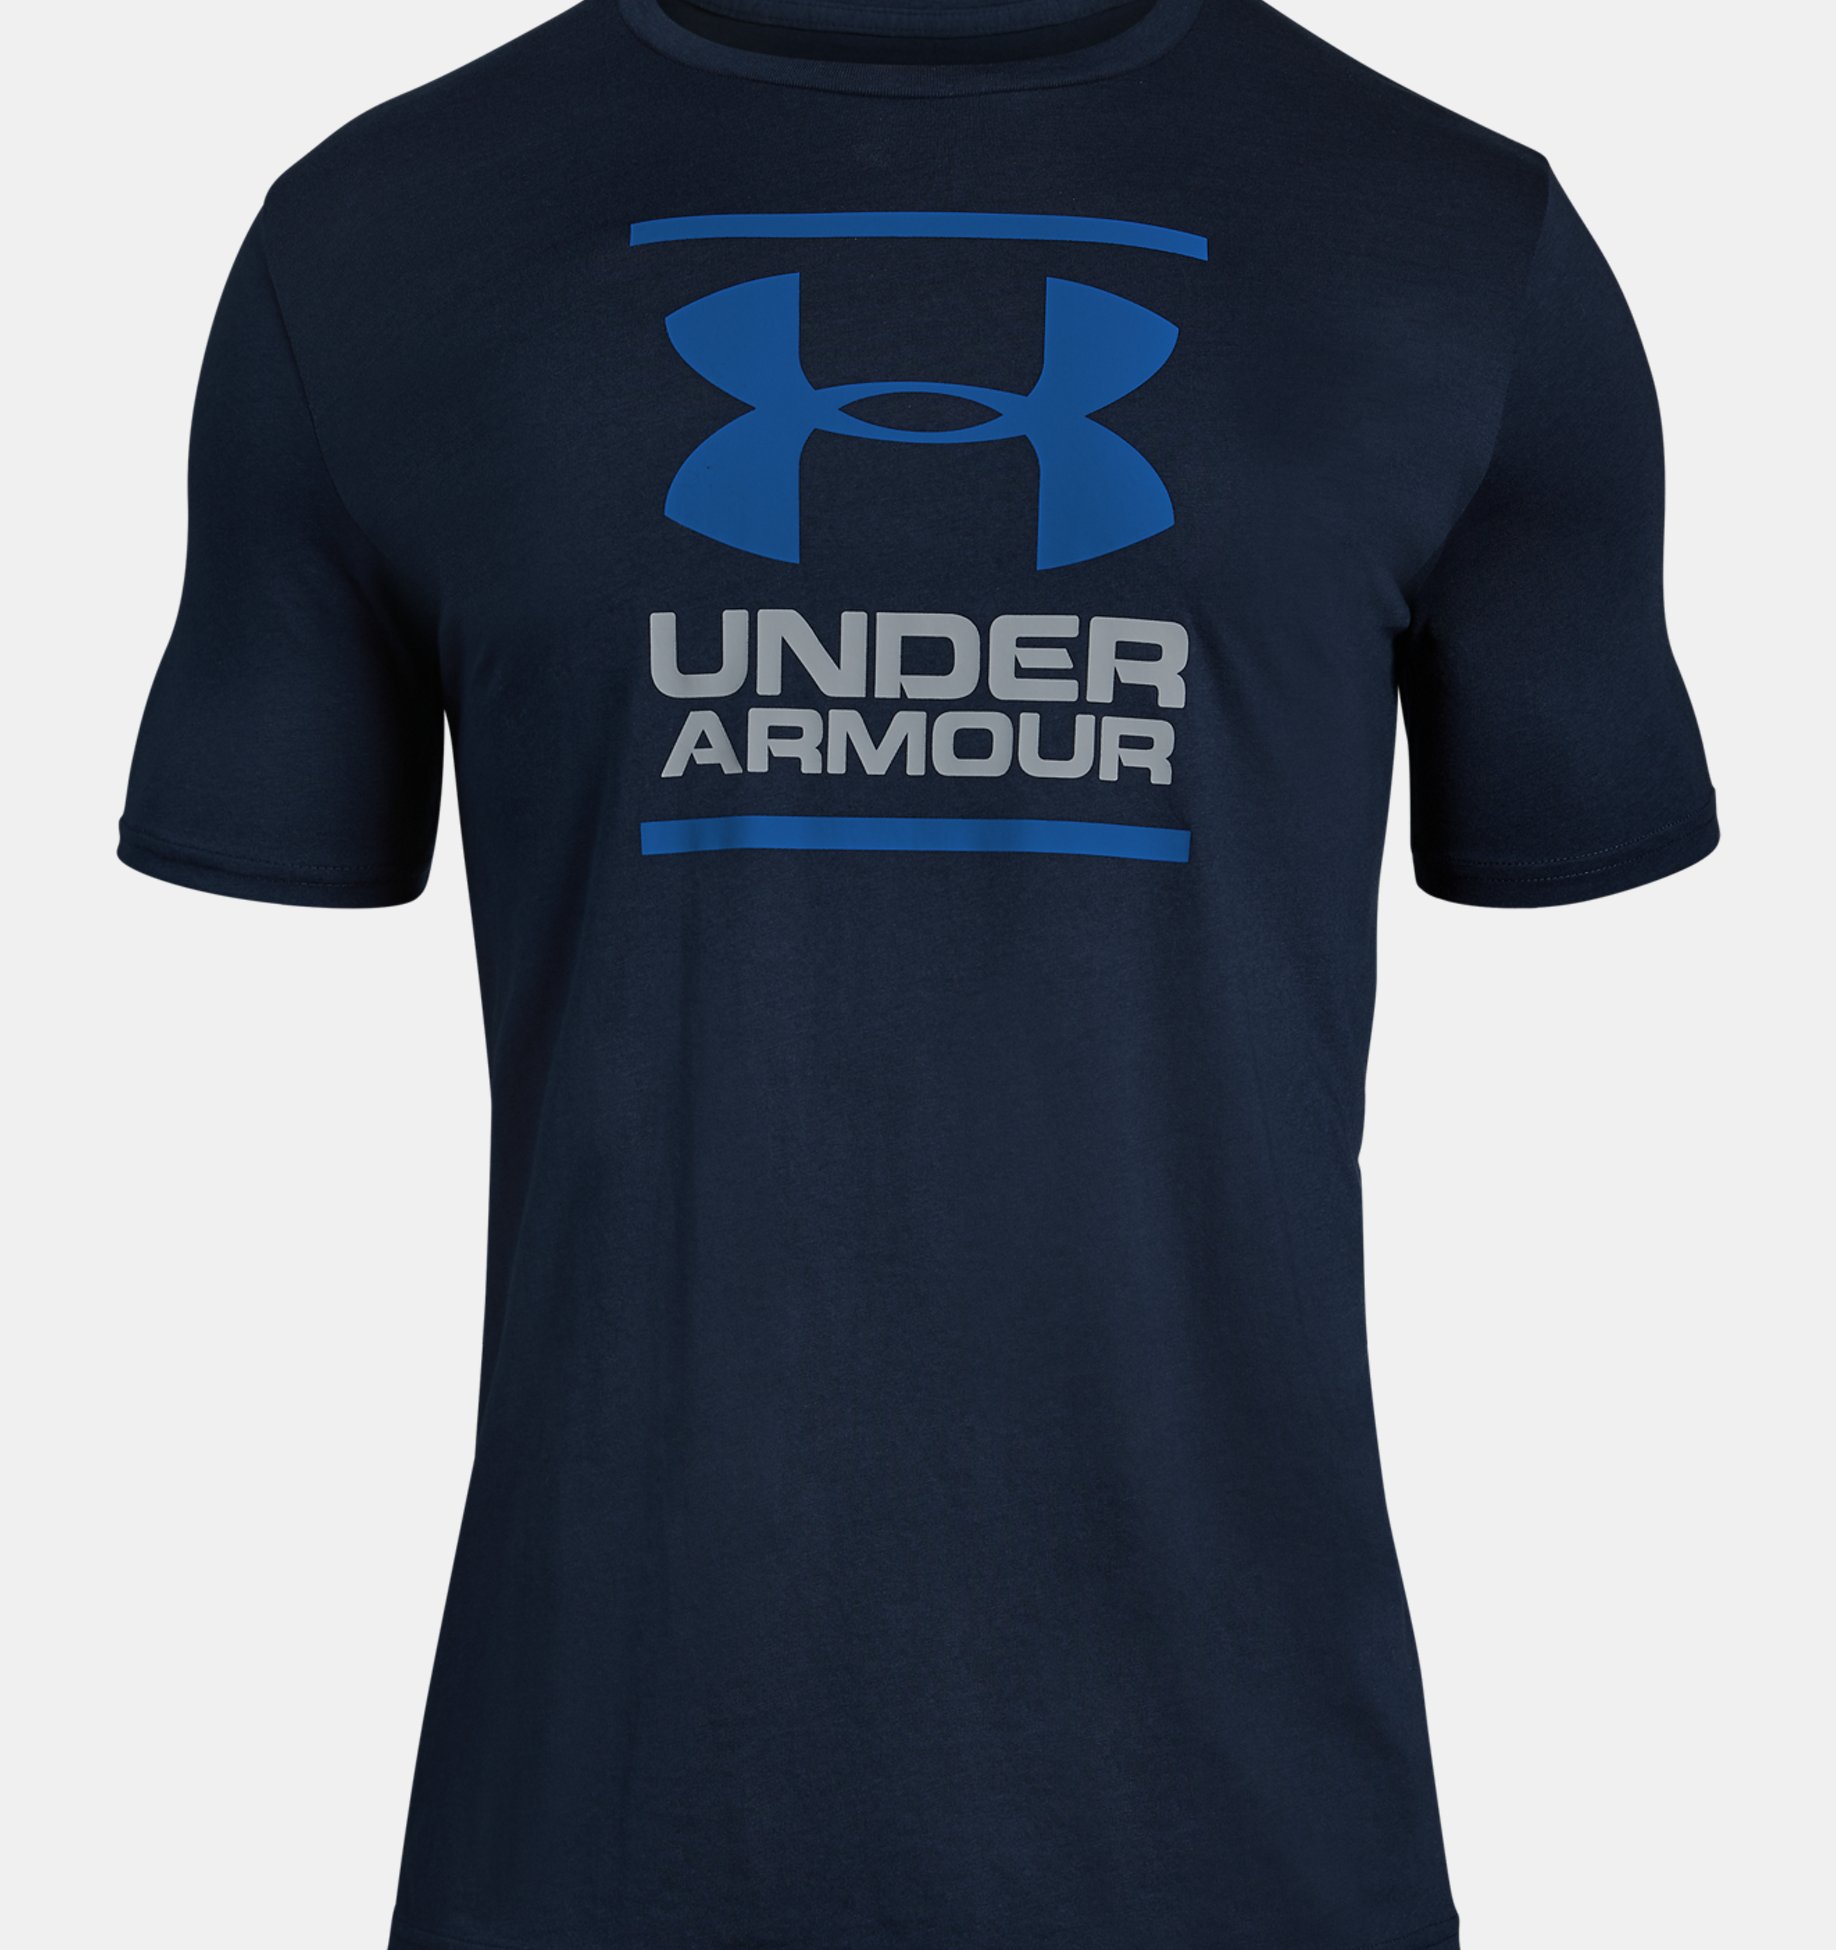 1326849-454 Under Armour Foundation Sleeved T Mens T-Shirt-NEW 